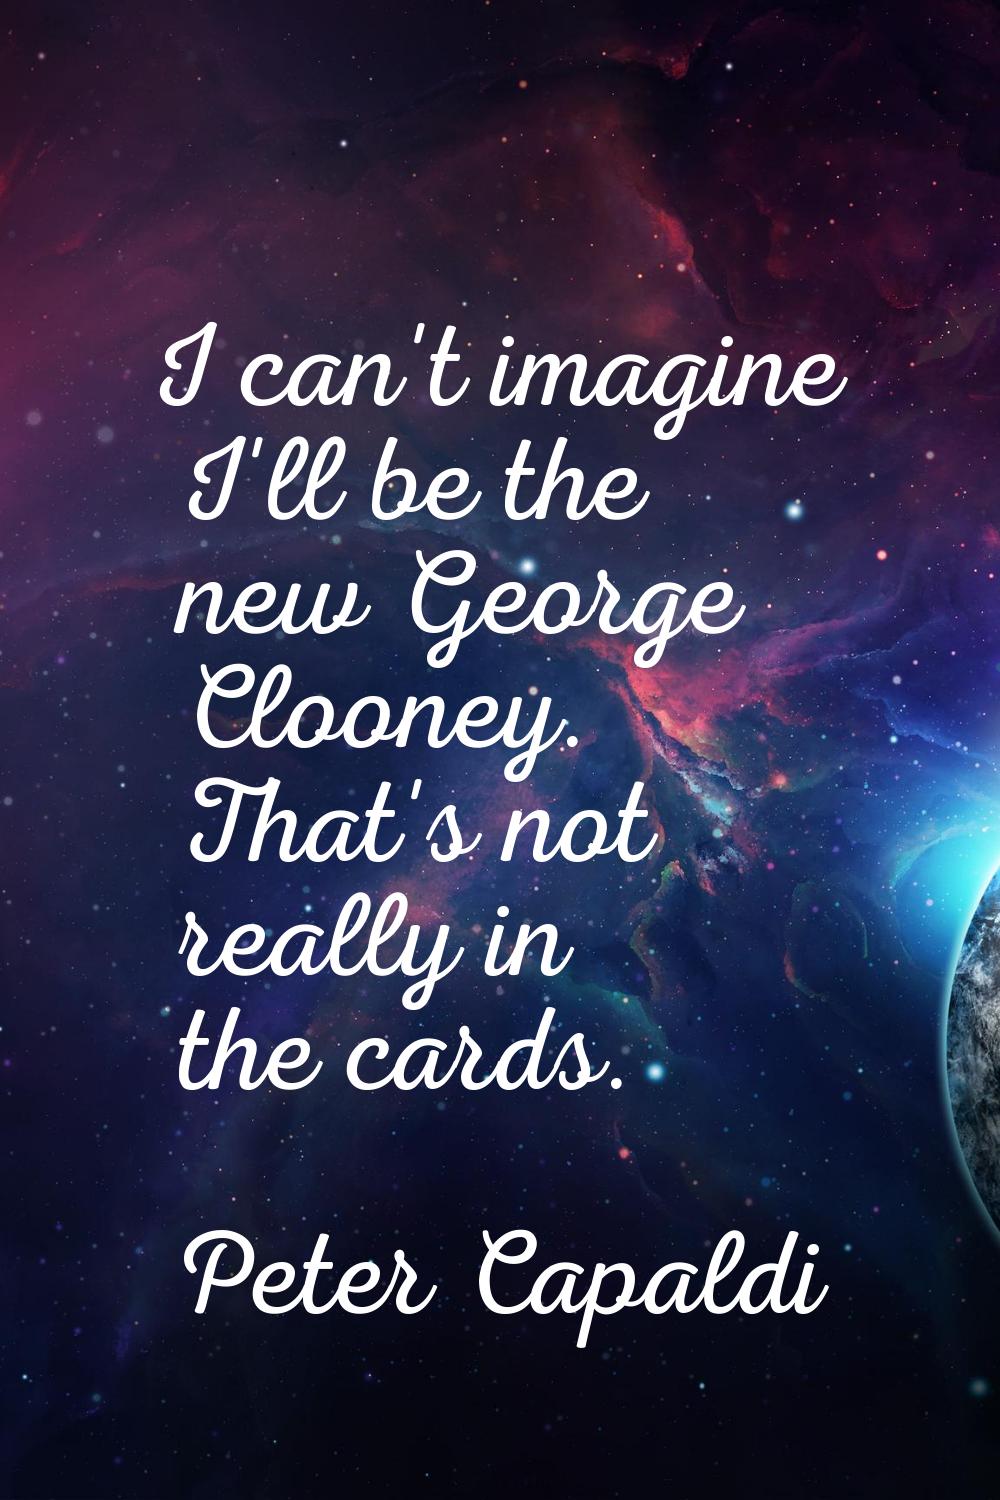 I can't imagine I'll be the new George Clooney. That's not really in the cards.